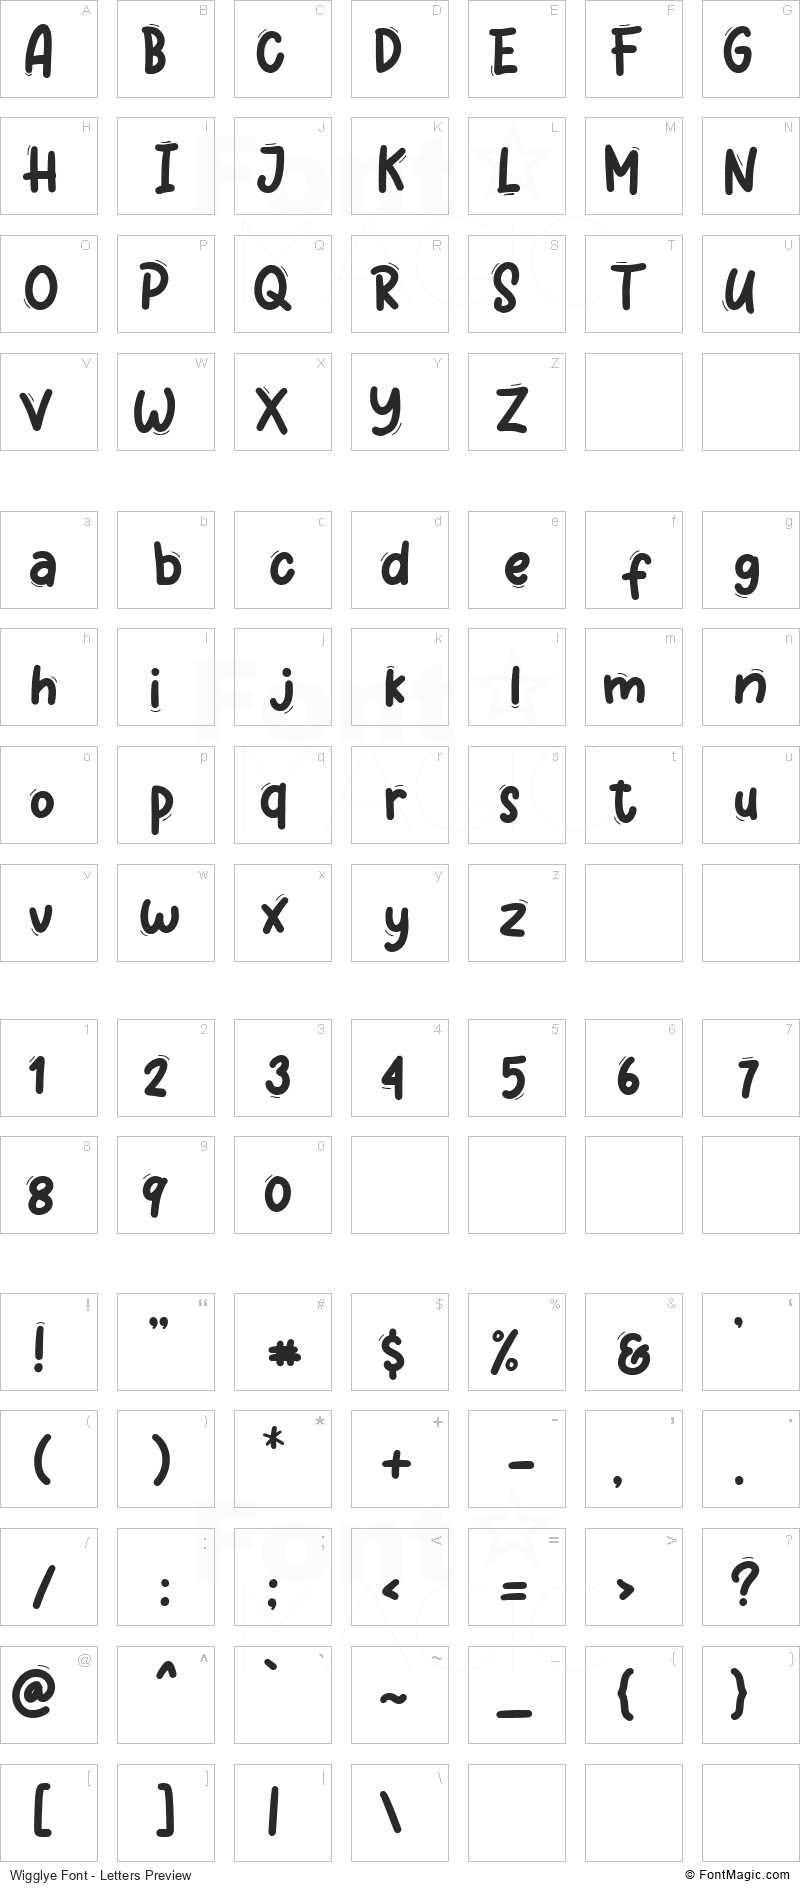 Wigglye Font - All Latters Preview Chart